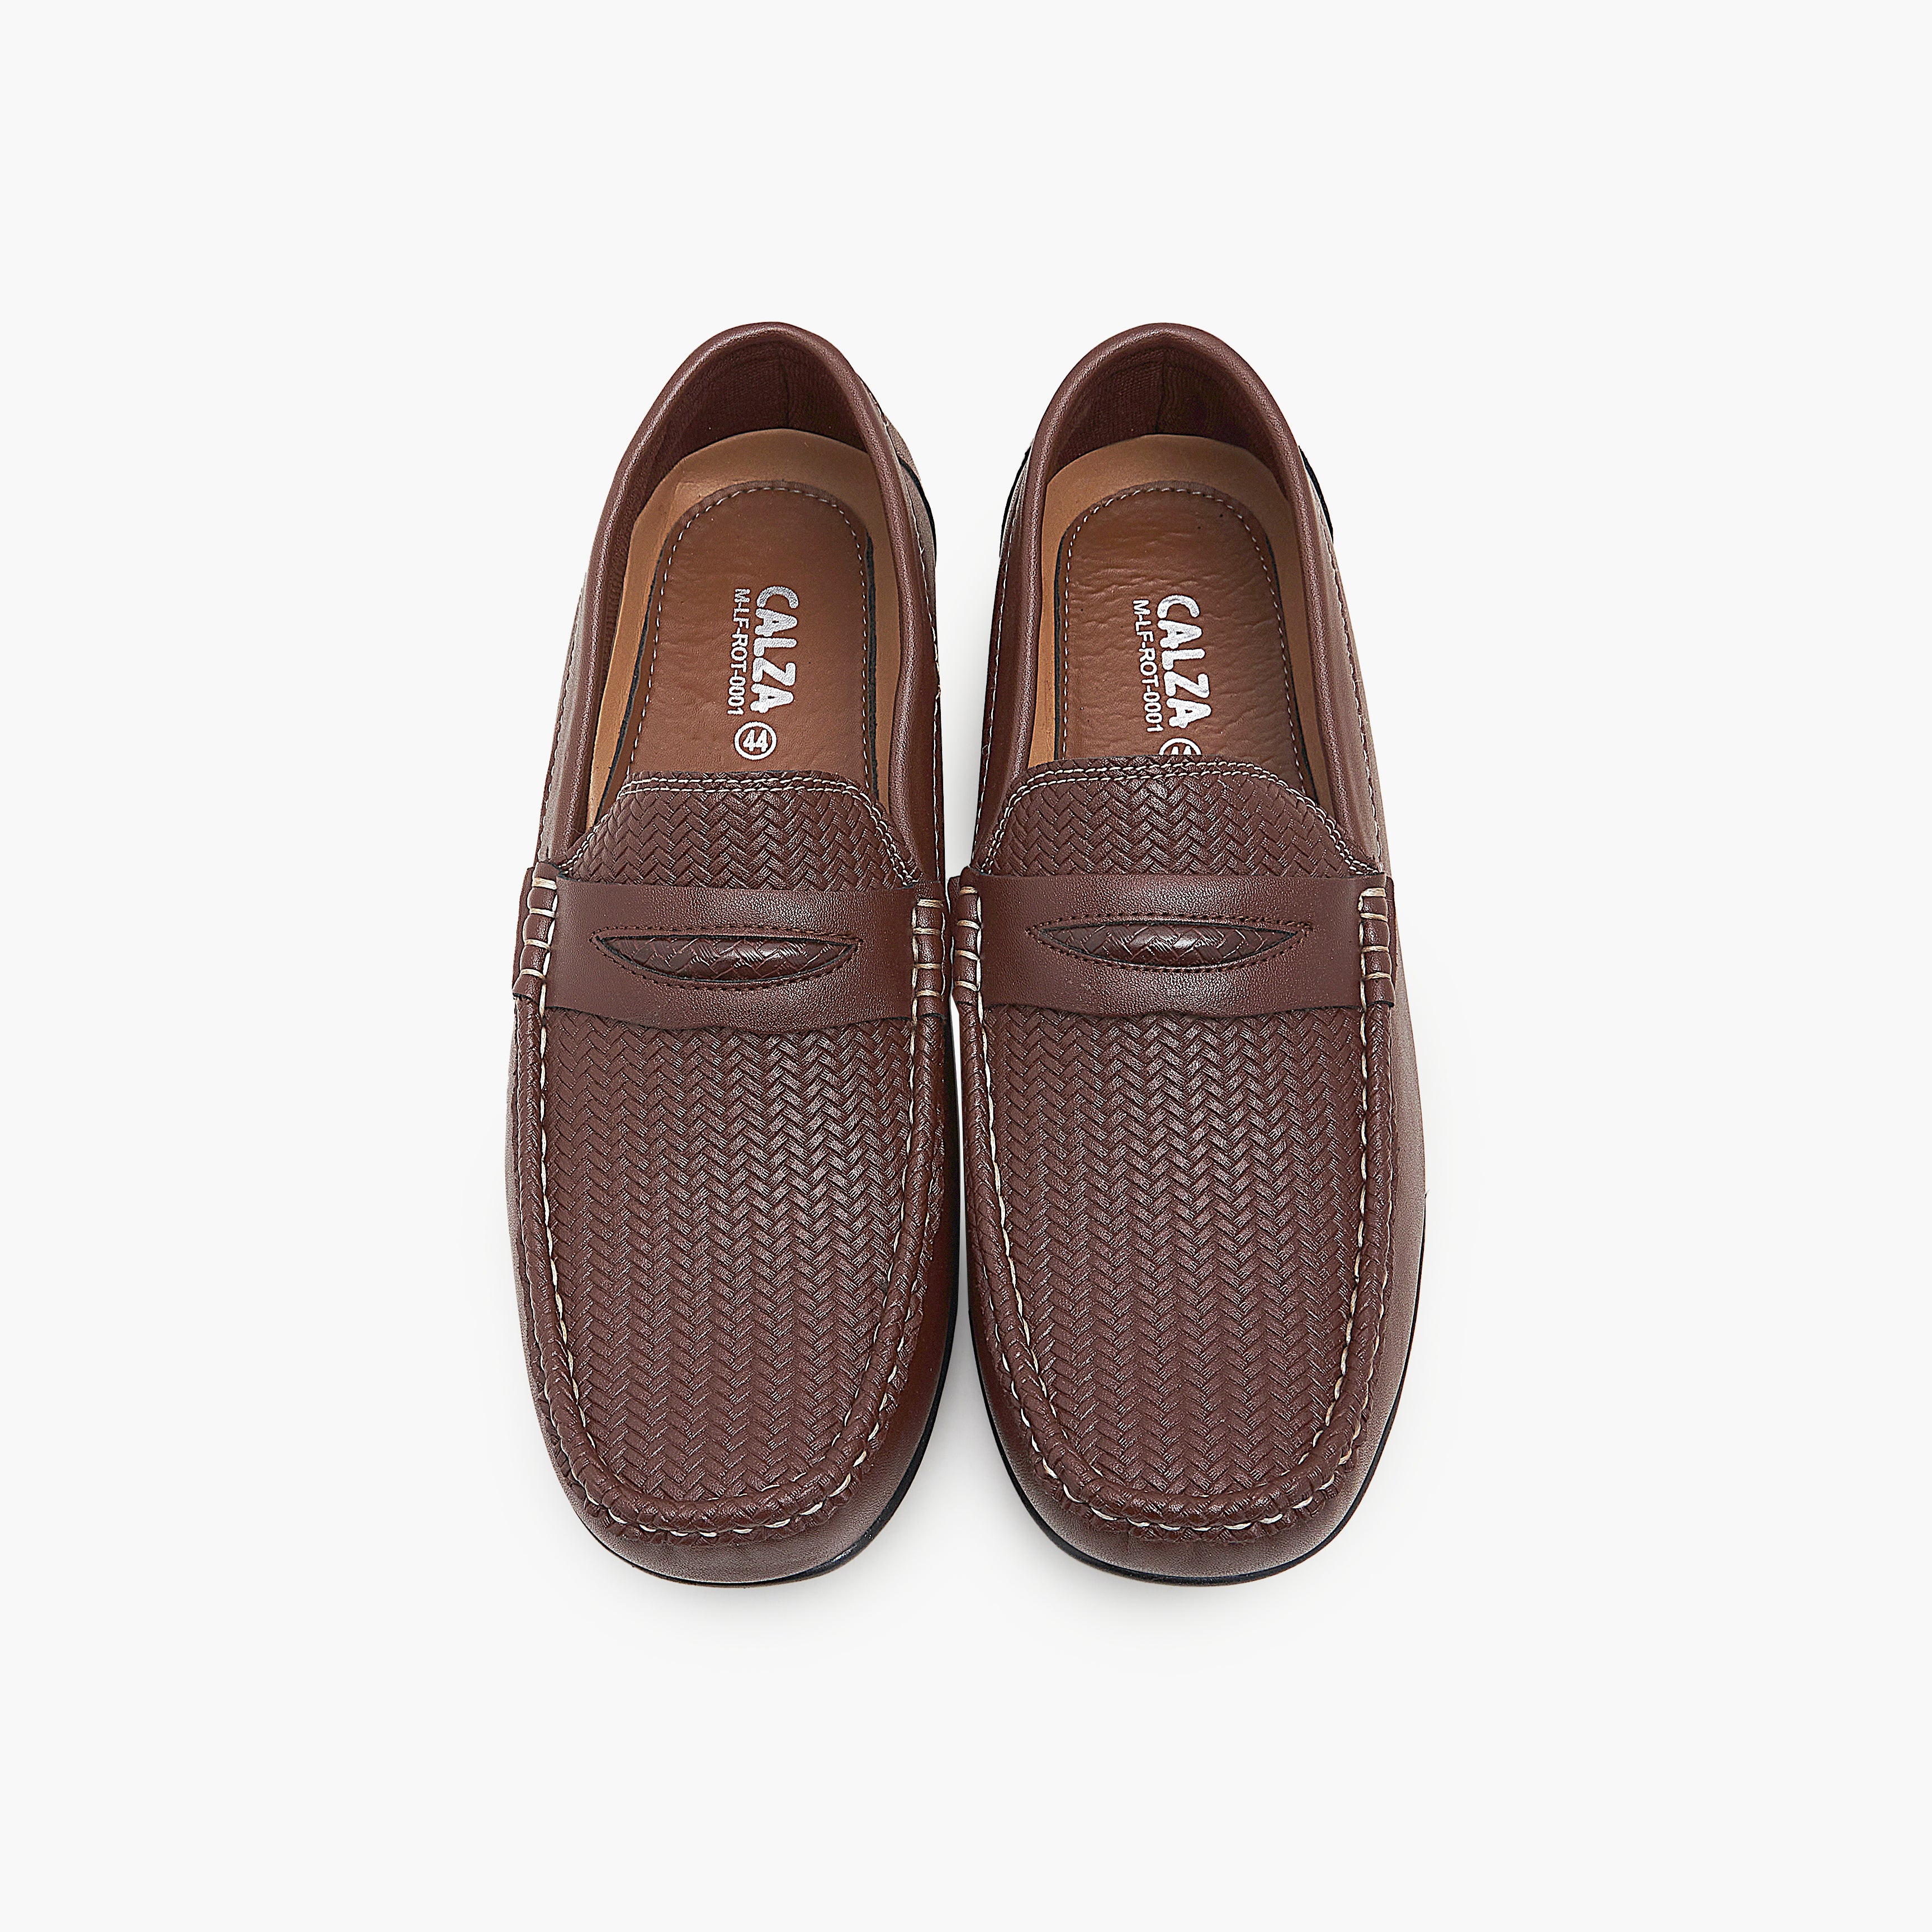 Comfortable Loafers for Men